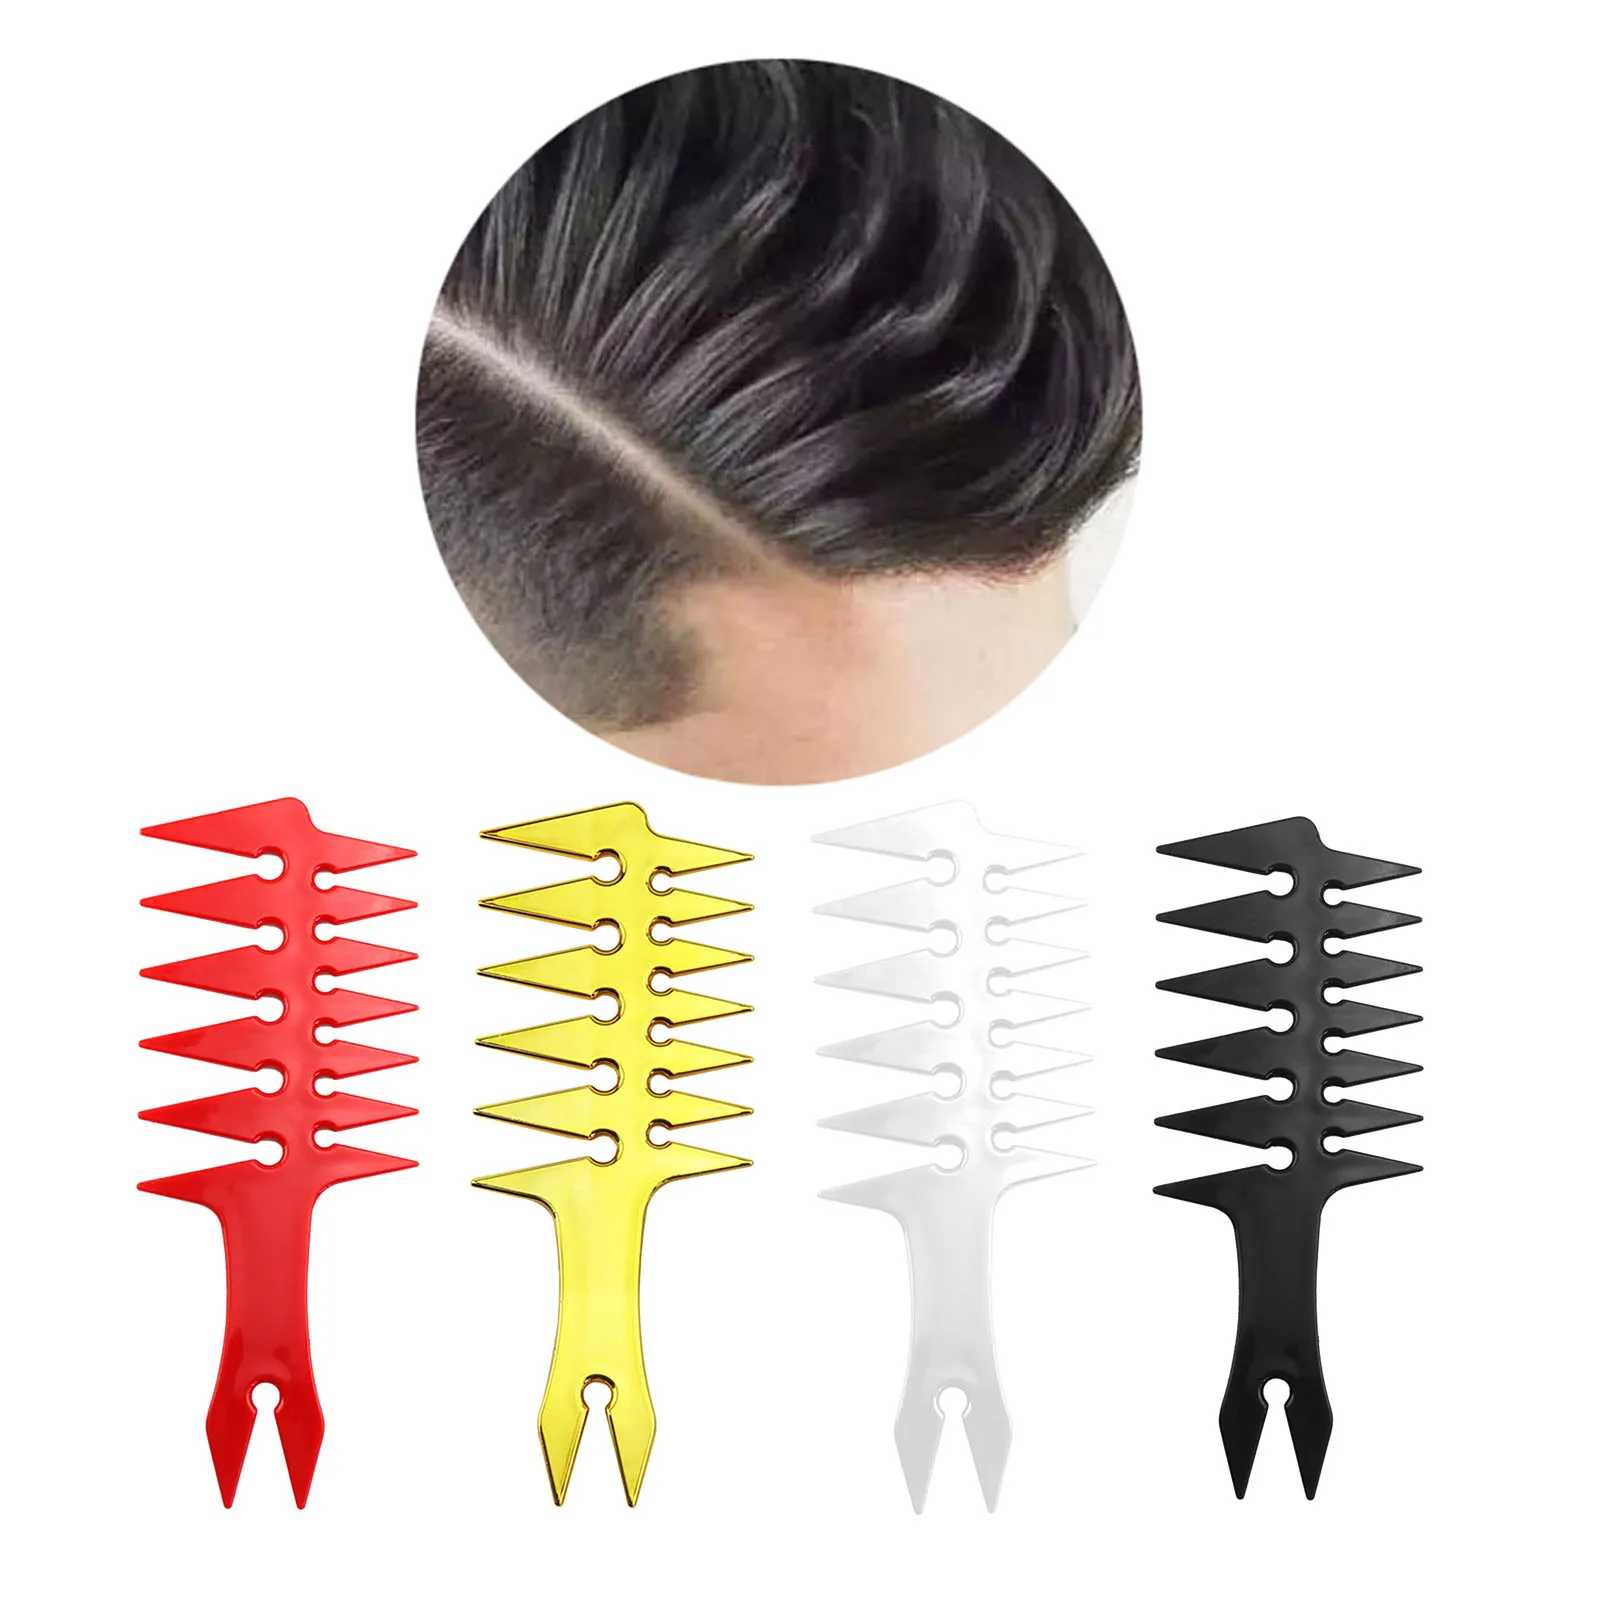 Men's Pompadour Hairstyling Combs Wide Tooth Fork Comb Large Tooth Hair  Styling Comb for Slicked Back Hairstyle Retro Oil Head|Combs| - AliExpress